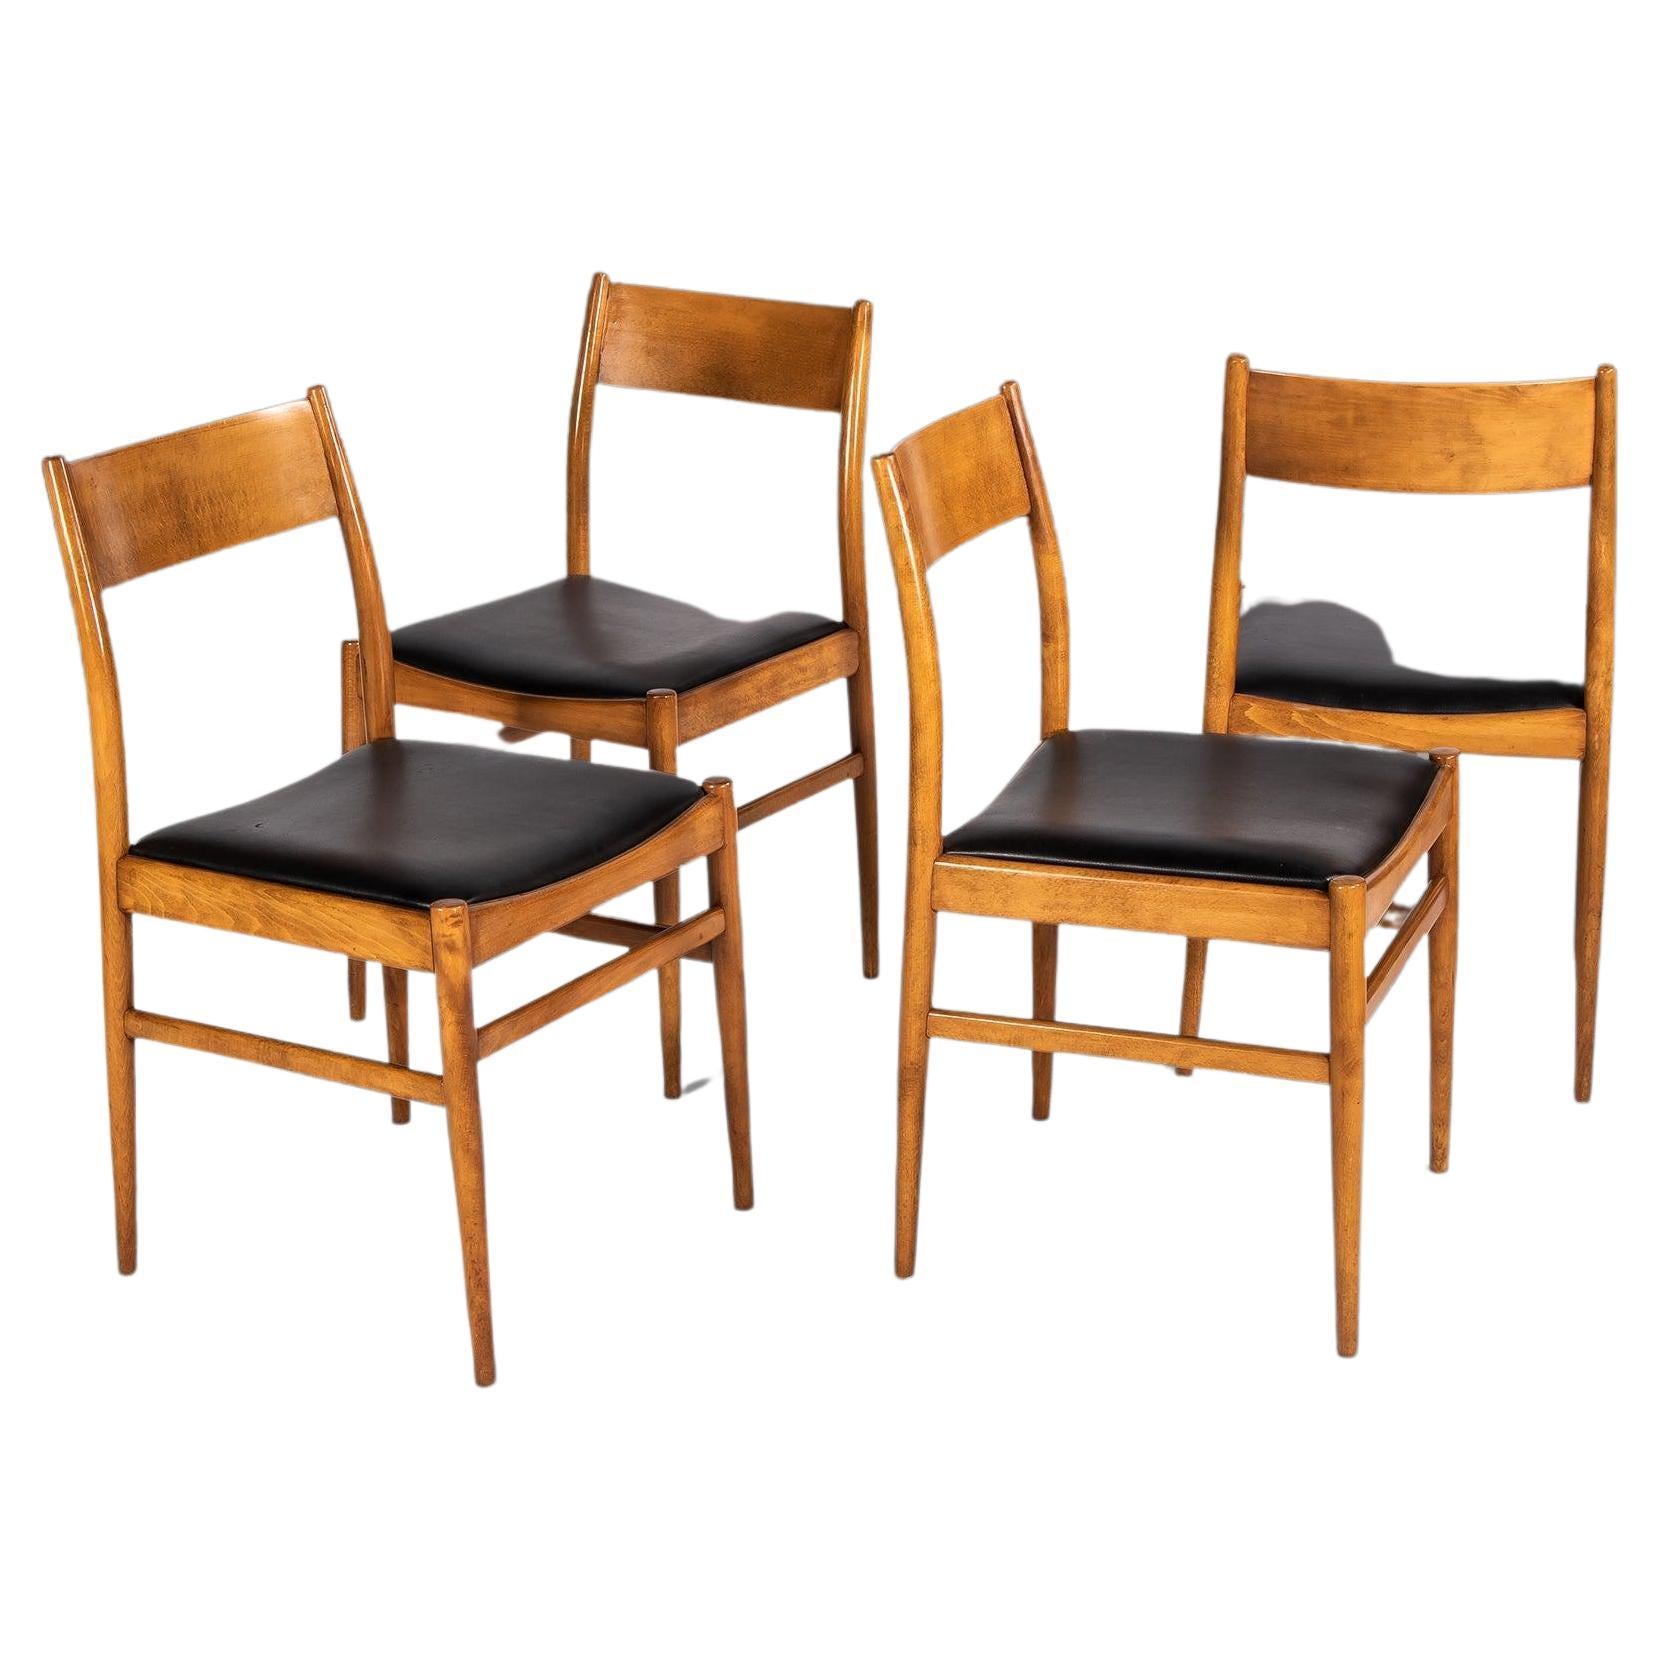 Set of Four '4' Mid Century Danish Modern Contoured Oak Dining Chairs, c. 1960's For Sale